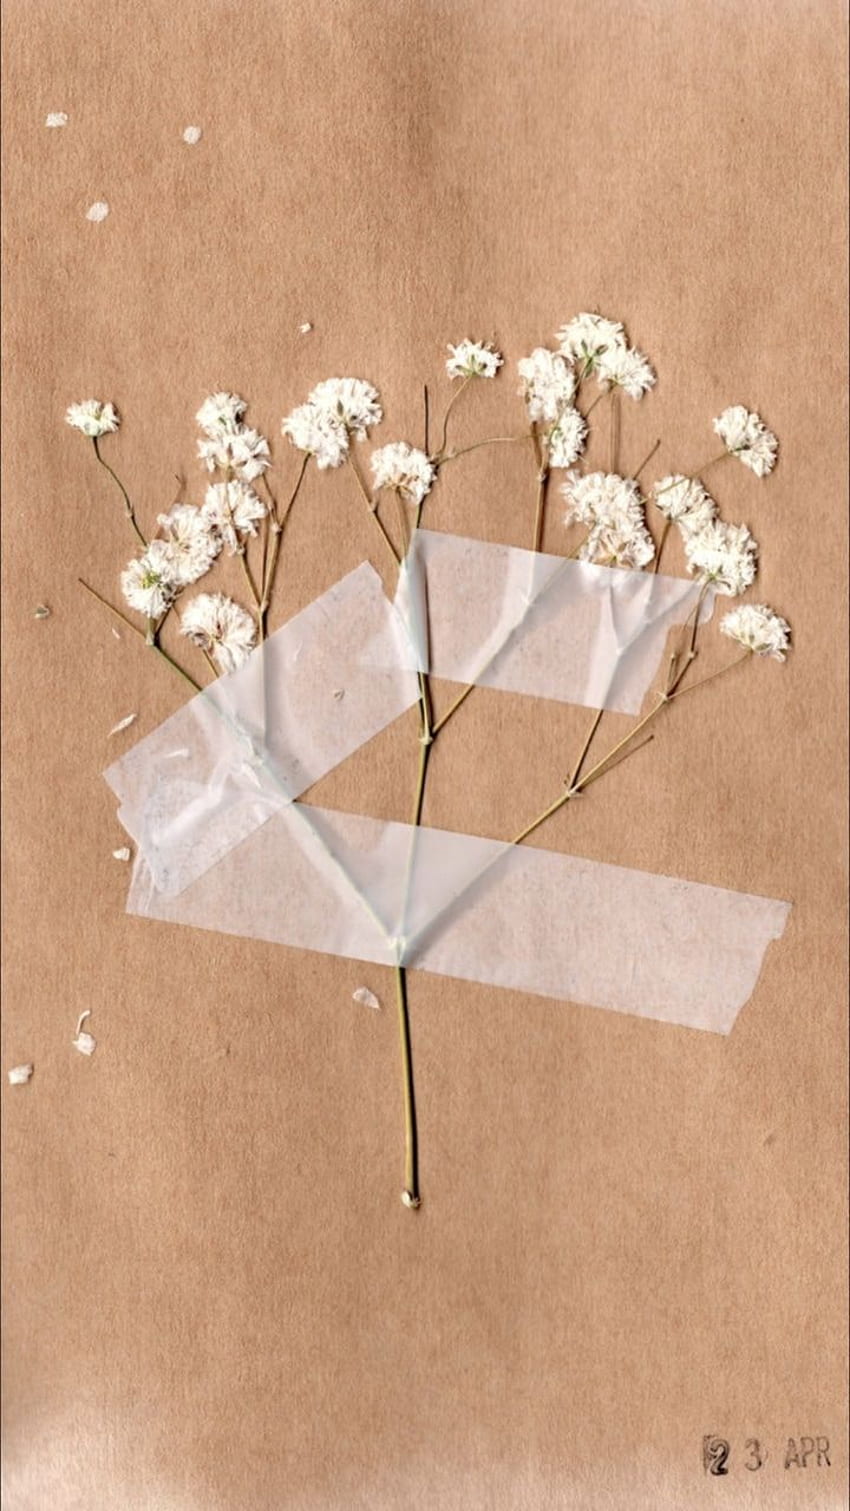 A piece of brown paper, with a white piece of tape, and some small white flowers, taped to it - Beige